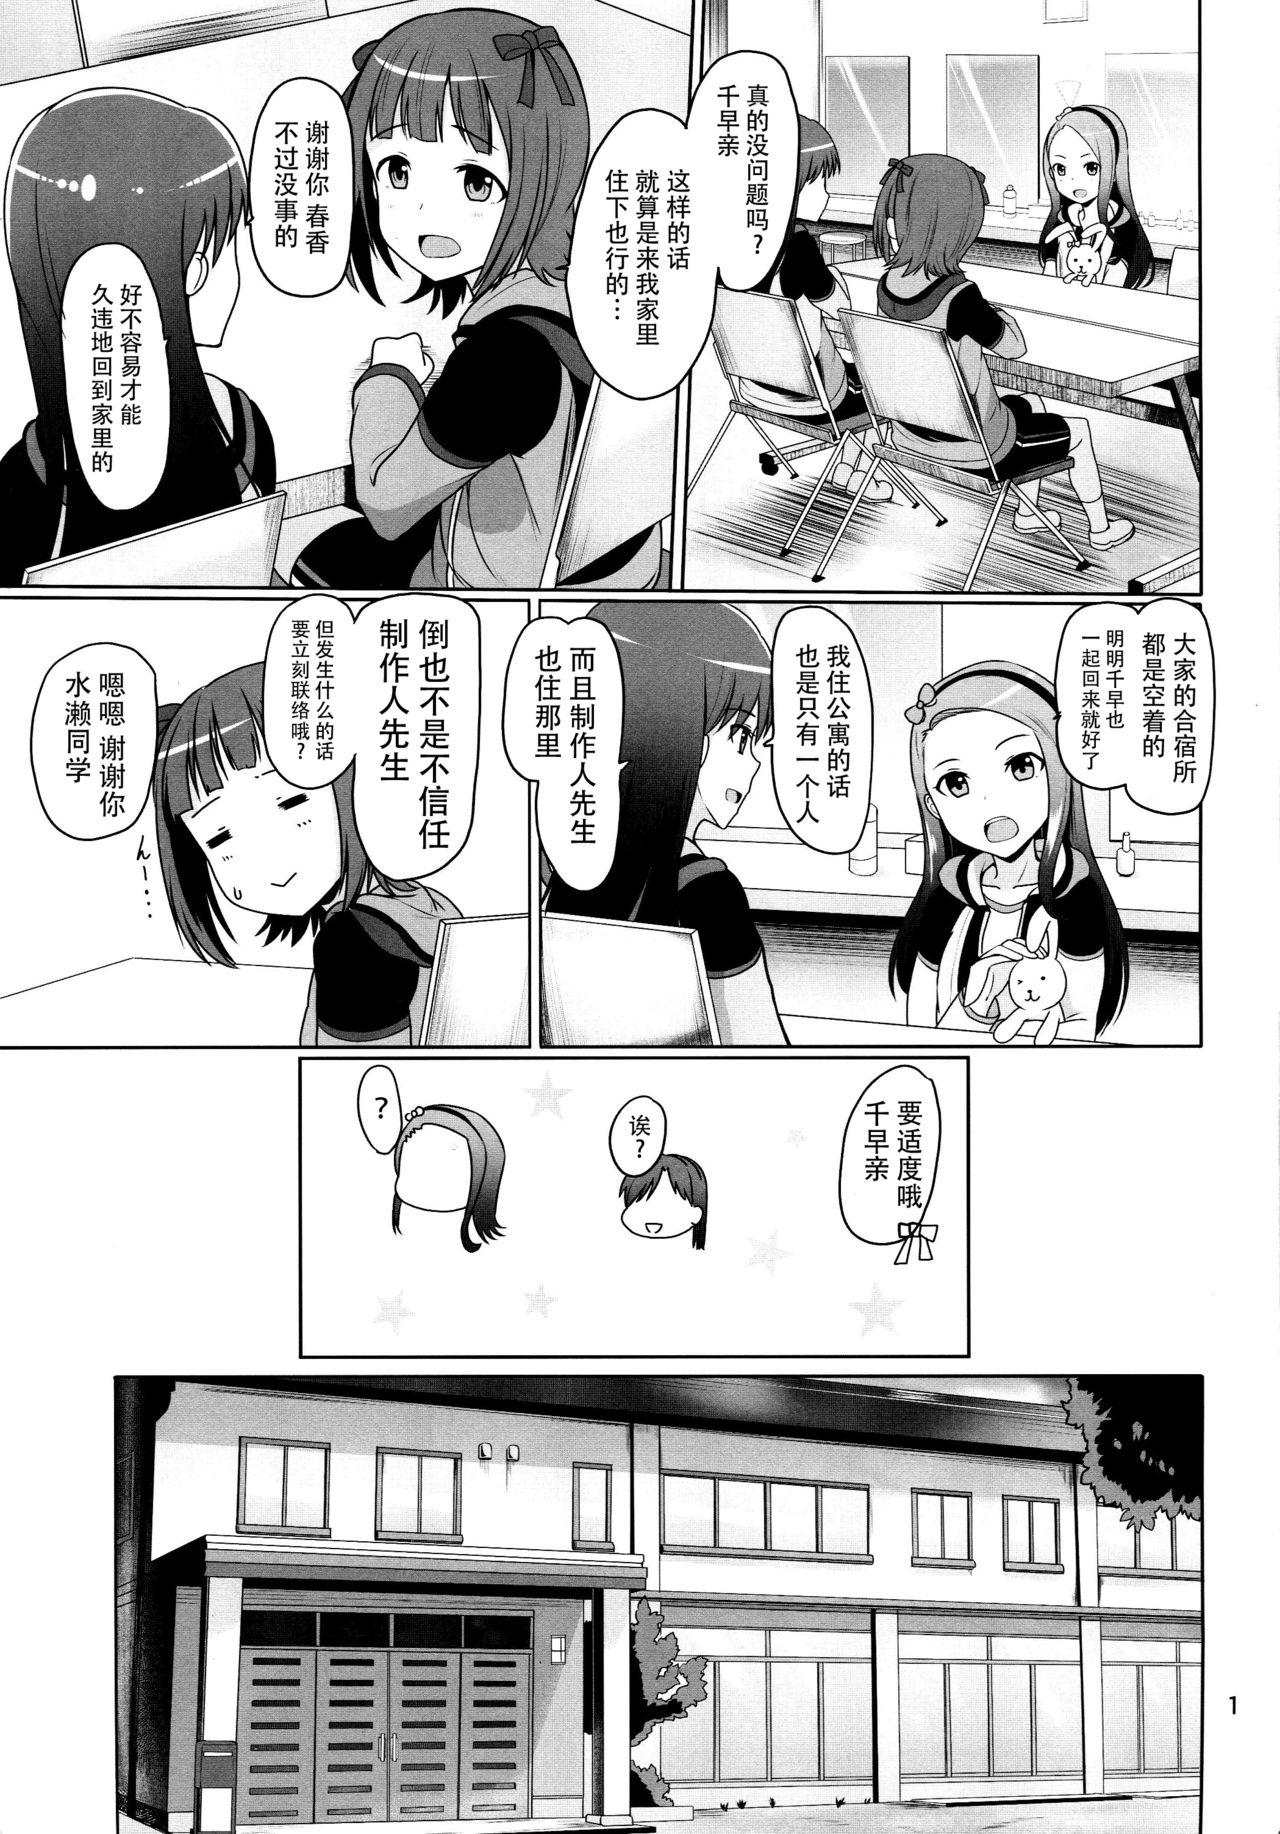 Small Futari no Ie - The idolmaster Soapy - Page 3